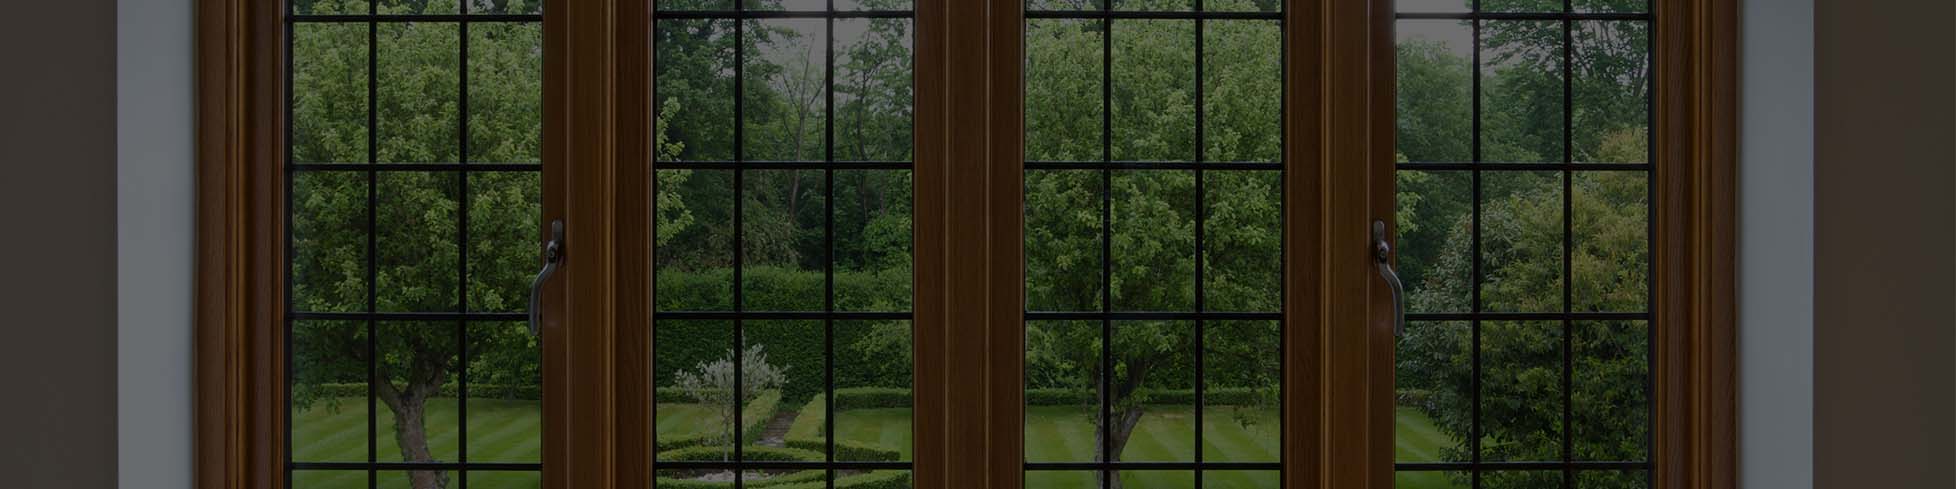 Wood replacement windows are environmentally friendly and affordable for Wisconsin homeowners